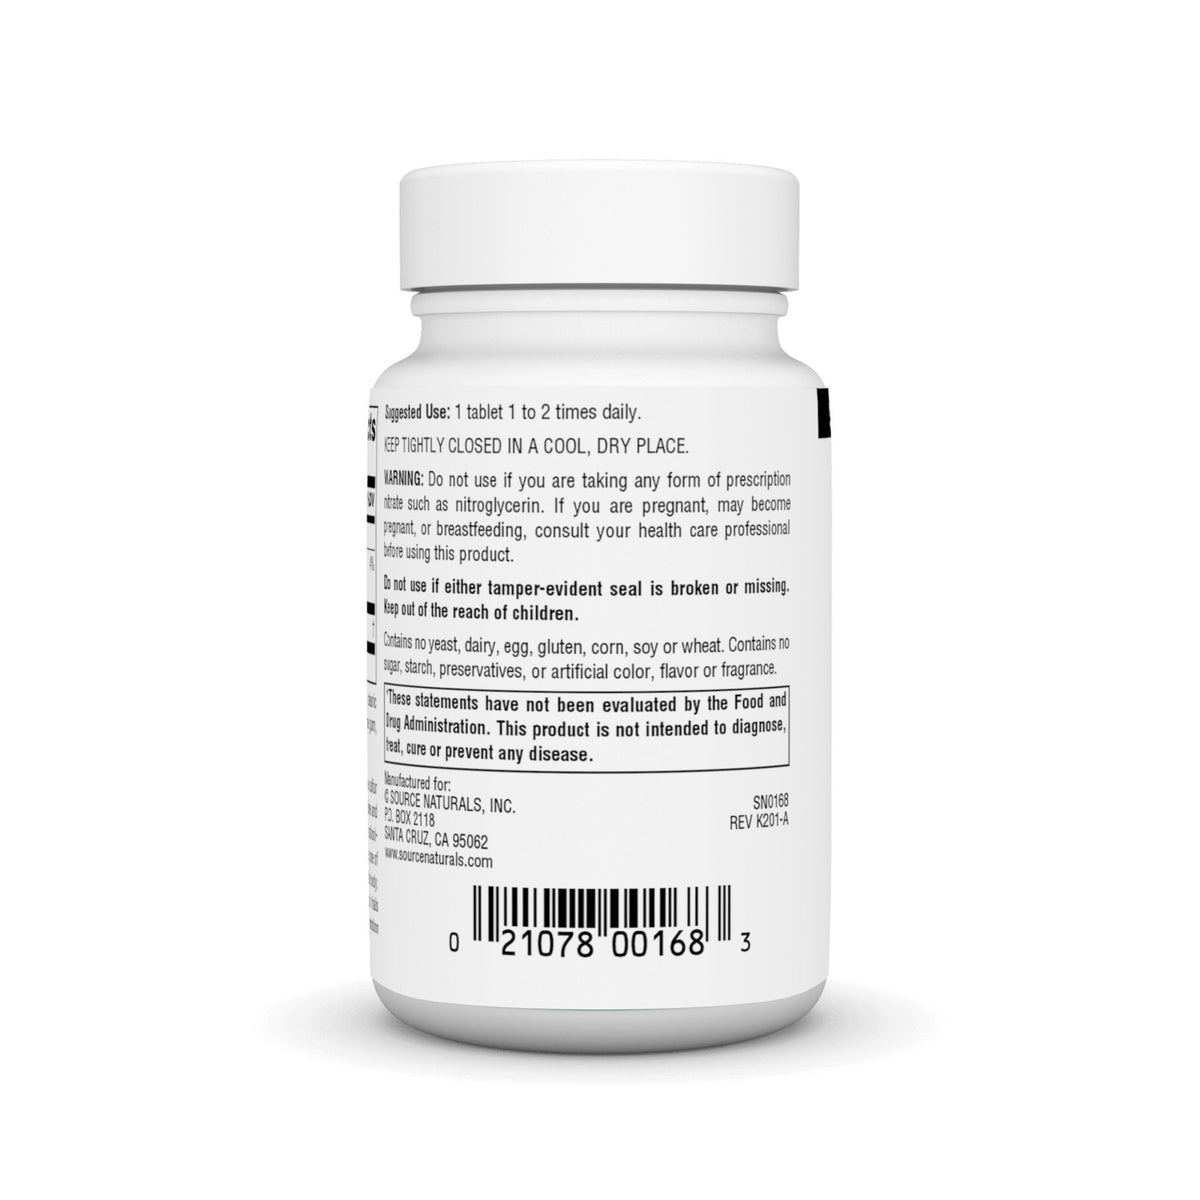 Source Naturals, Inc. N-Acetyl Cysteine 1000mg 30 Tablet